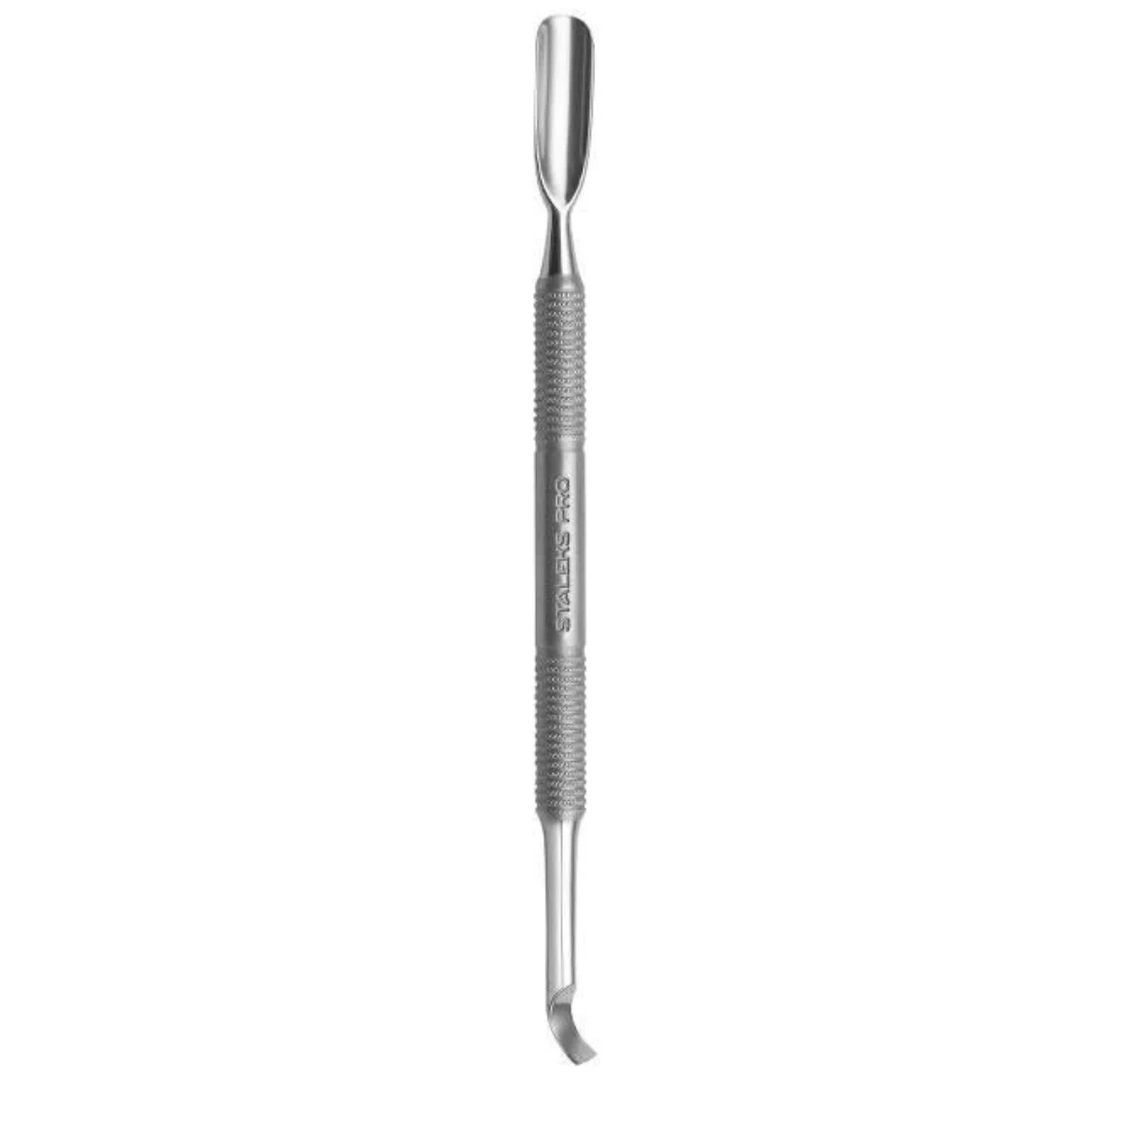 STALEKS PRO Cuticle Pusher, EXPERT 30/4.2 (Rounded Pusher and Bent Blade)